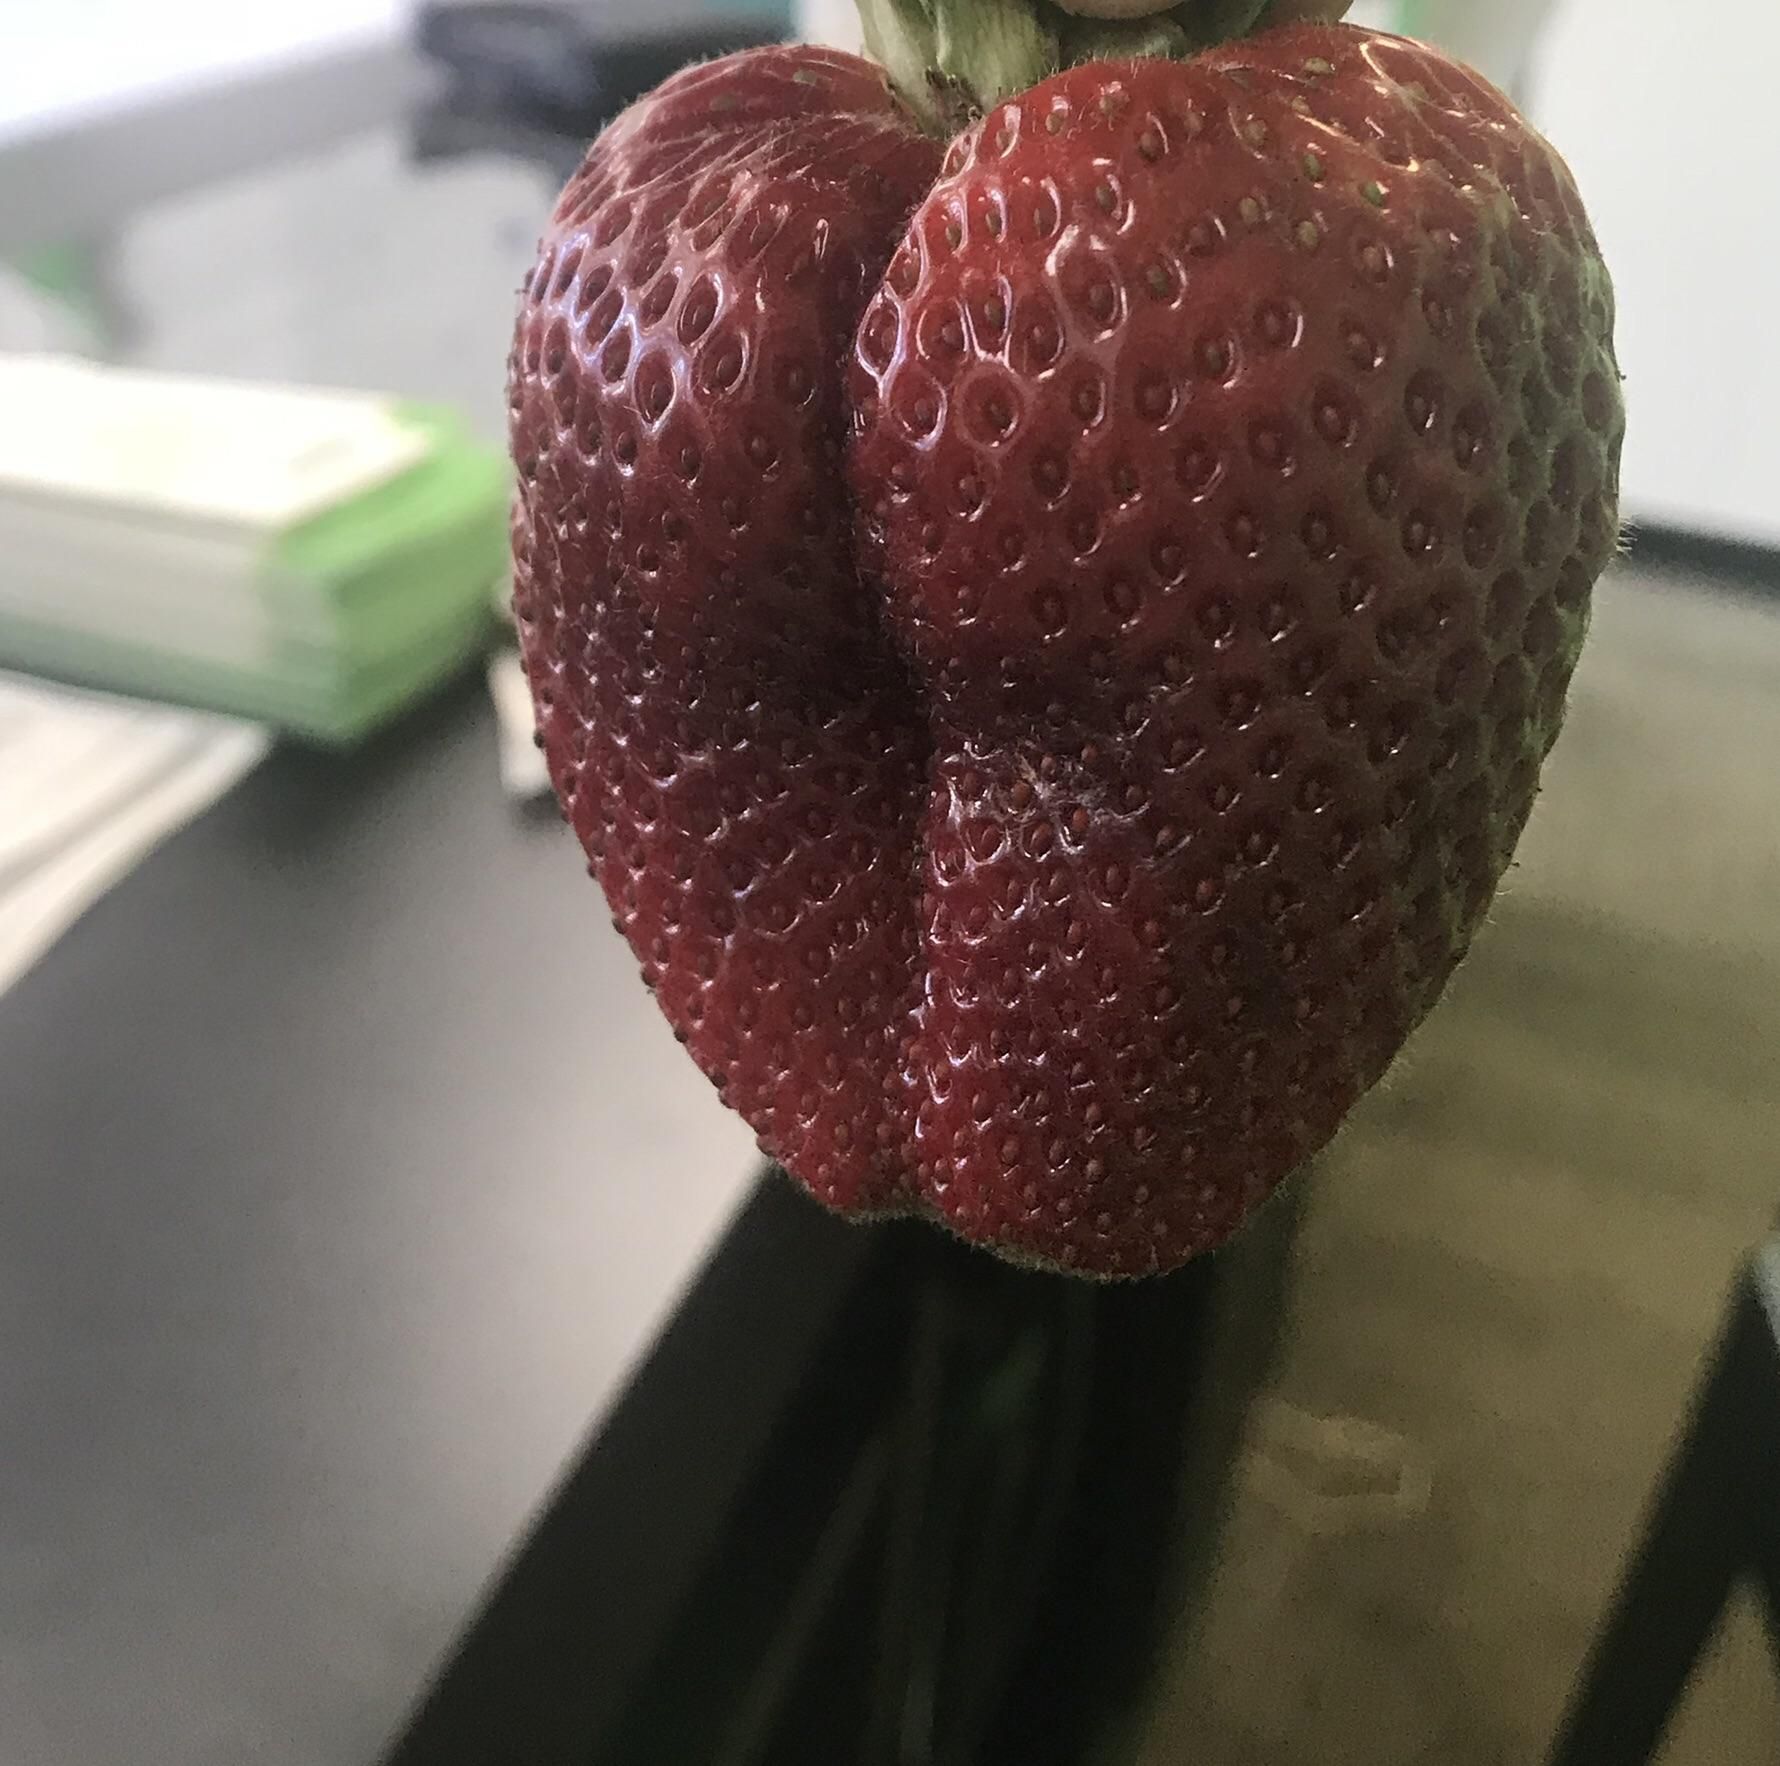 All of a sudden, I wanna eat strawberries again.